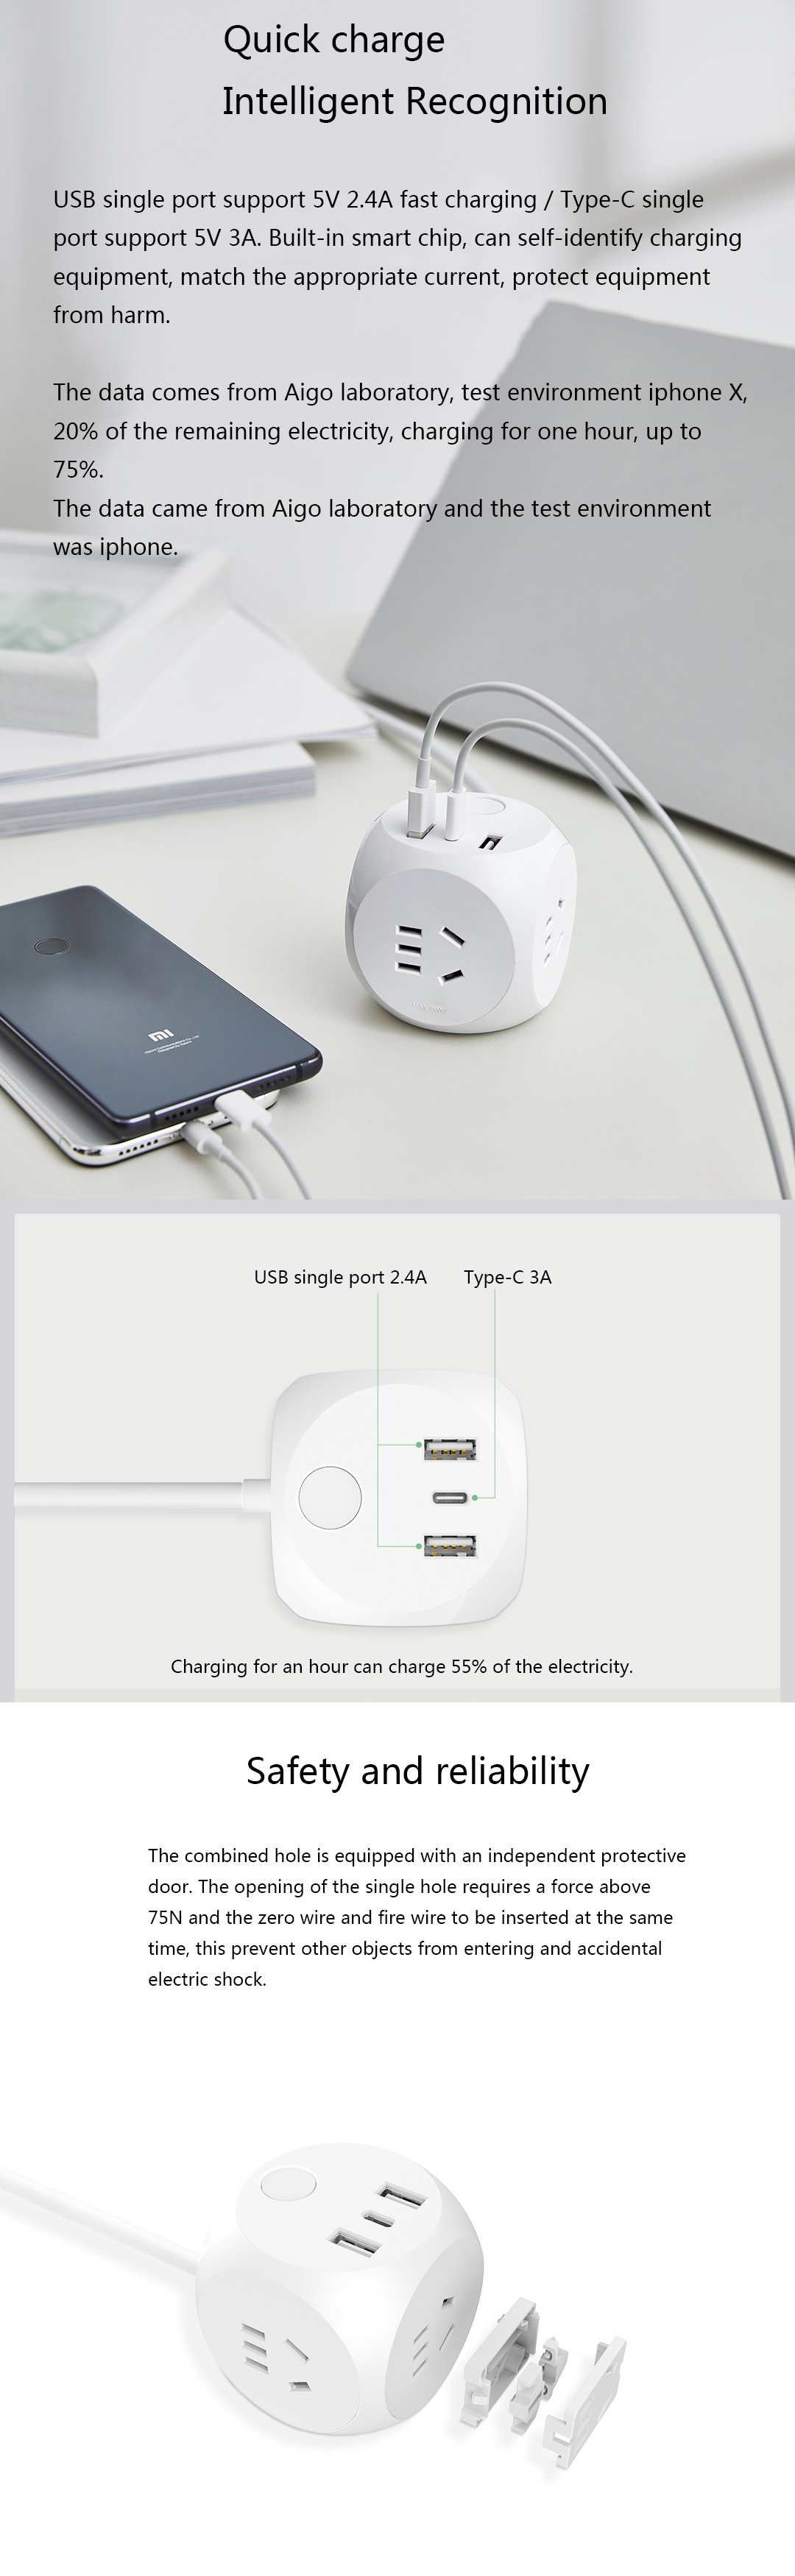 Aigo-Multi-Port-Smart-Identification-Fast-Charging-USB-Charger-Adapter-With-Extension-Cable-From-Eco-1550069